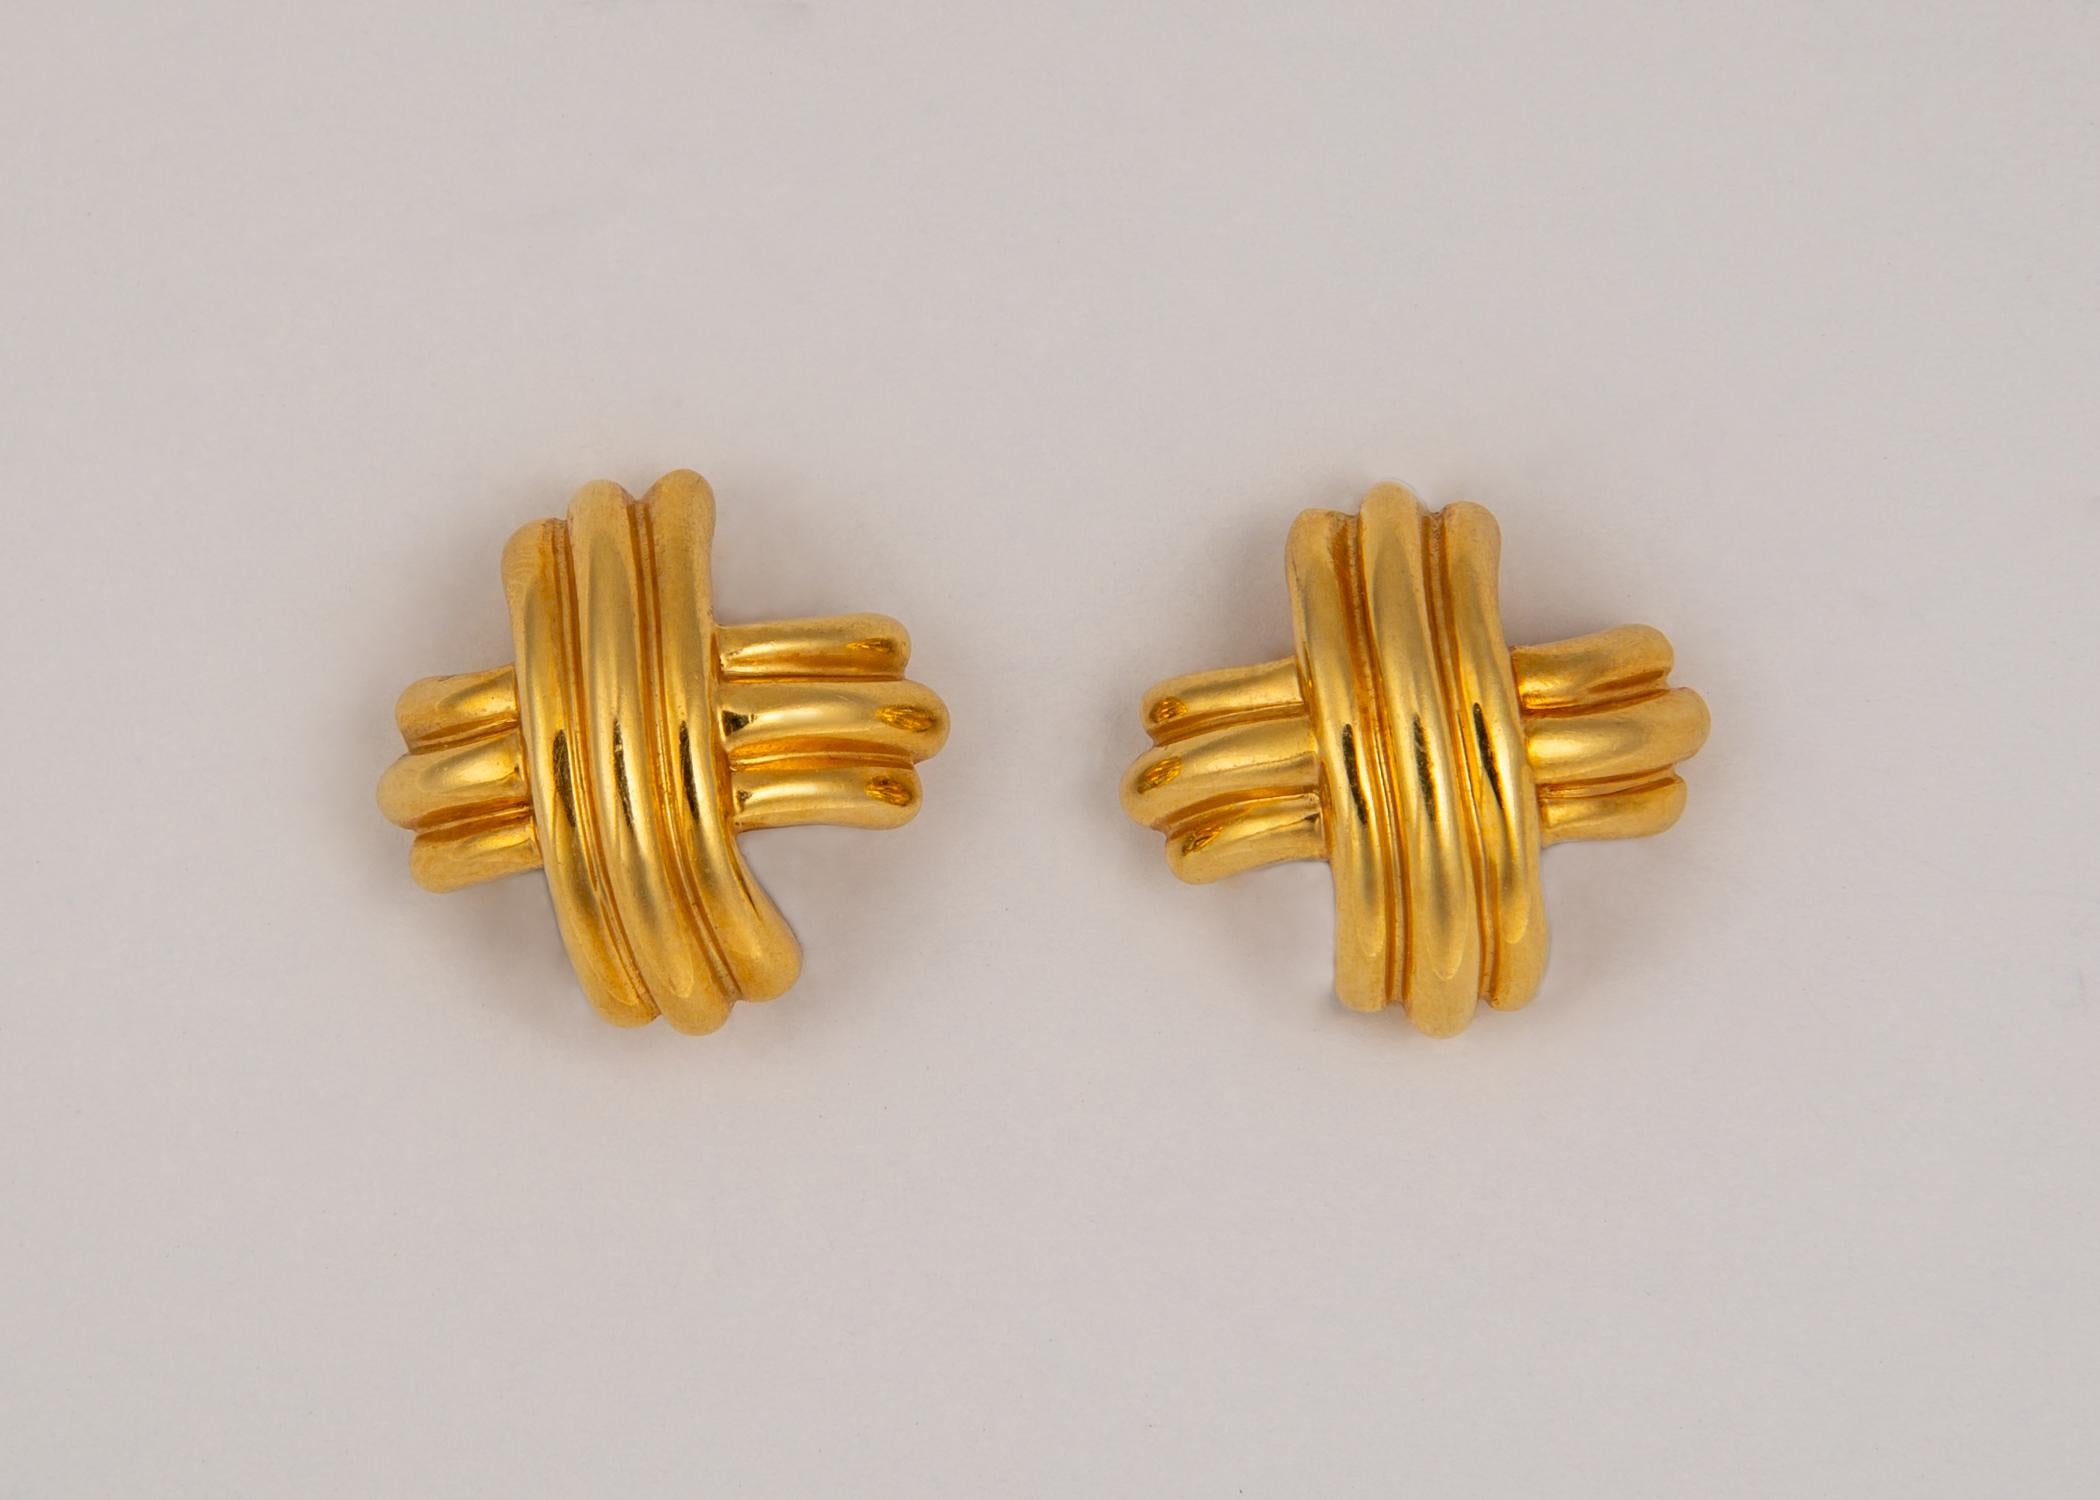 Tiffany & Co. created the perfect all the time gold earring. This 